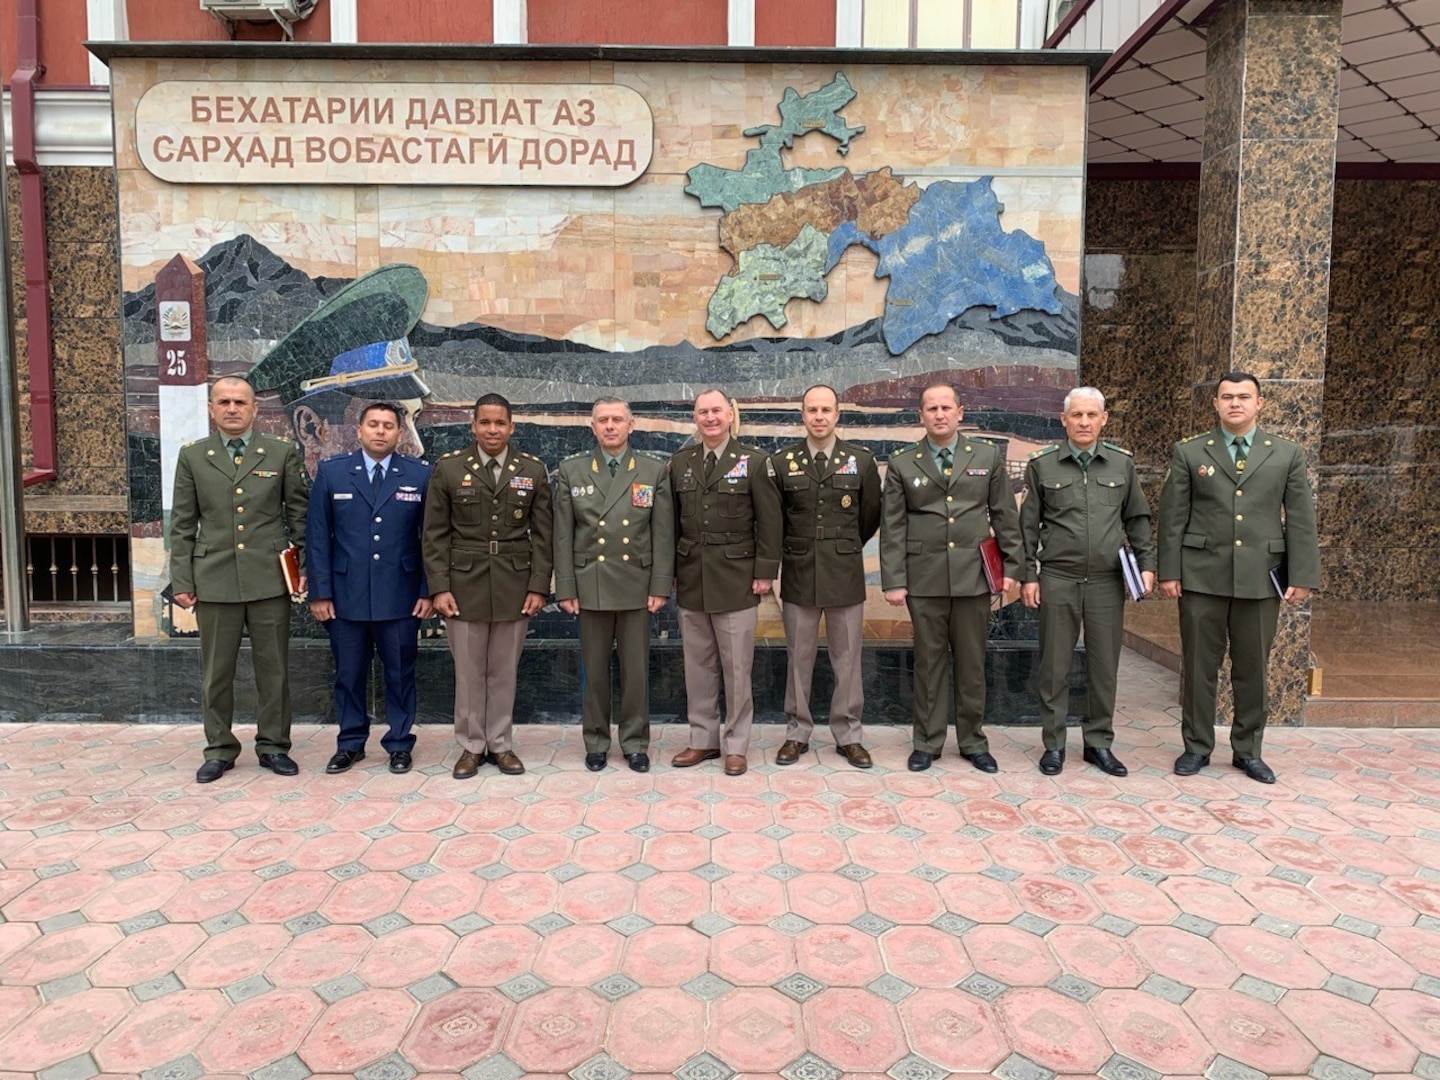 The Virginia National Guard begins recognizing its 20th year of partnership with the Republic of Tajikistan March 27, 2023, as VNG senior leaders visit with the Tajikistan Ministry of Defense in Dushanbe, Tajikistan. During the visit, the VNG team, led by Brig. Gen. James W. Ring, the VNG Director of the Joint Staff, participated in bilateral talks on military to military engagements. The Ministry of Defense also hosted a 20th anniversary celebration, commemorating two decades of partnership supporting the State Partnership Program. (Contributed photo)